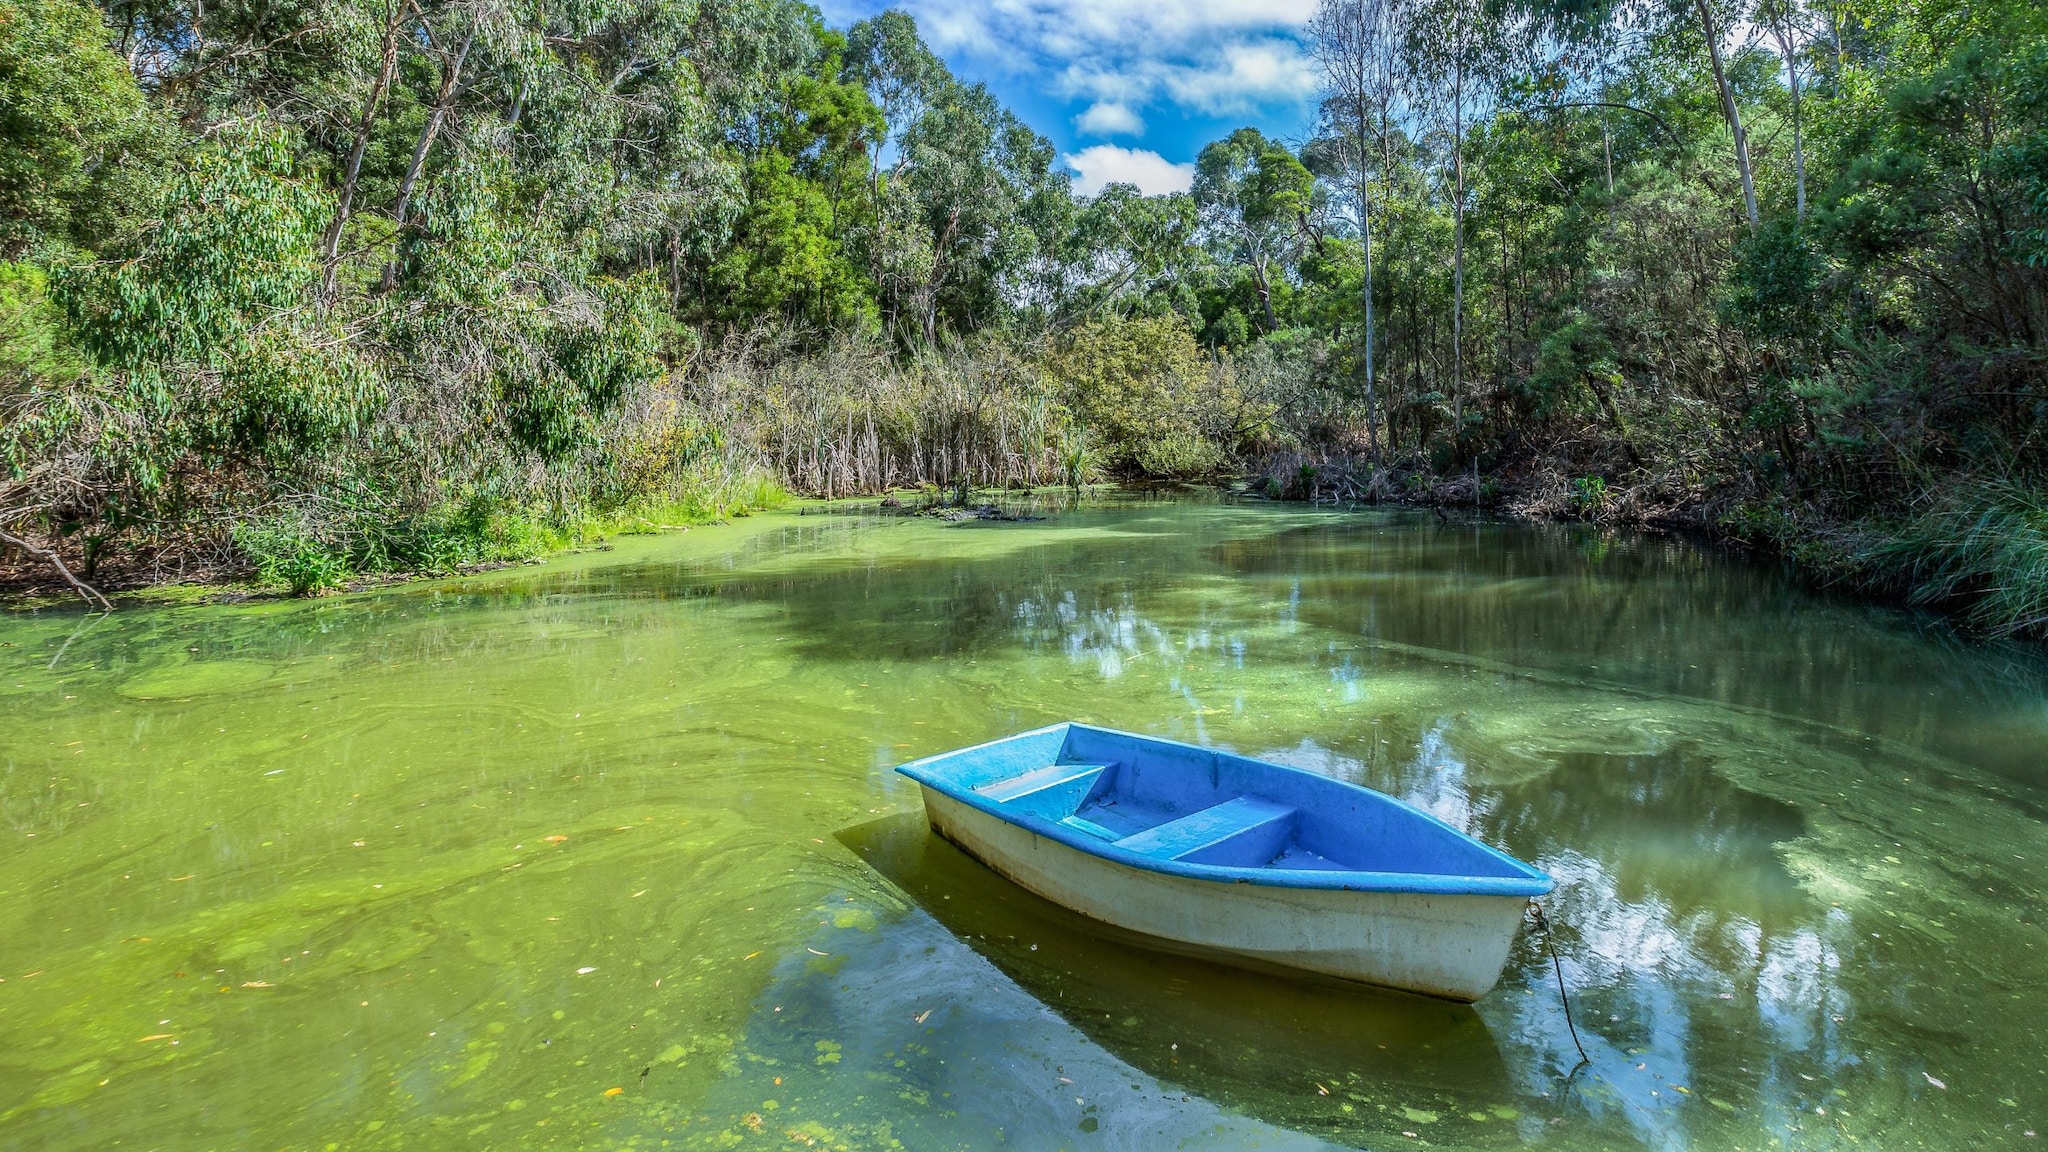 Small boat in a lake filled with bright green algae